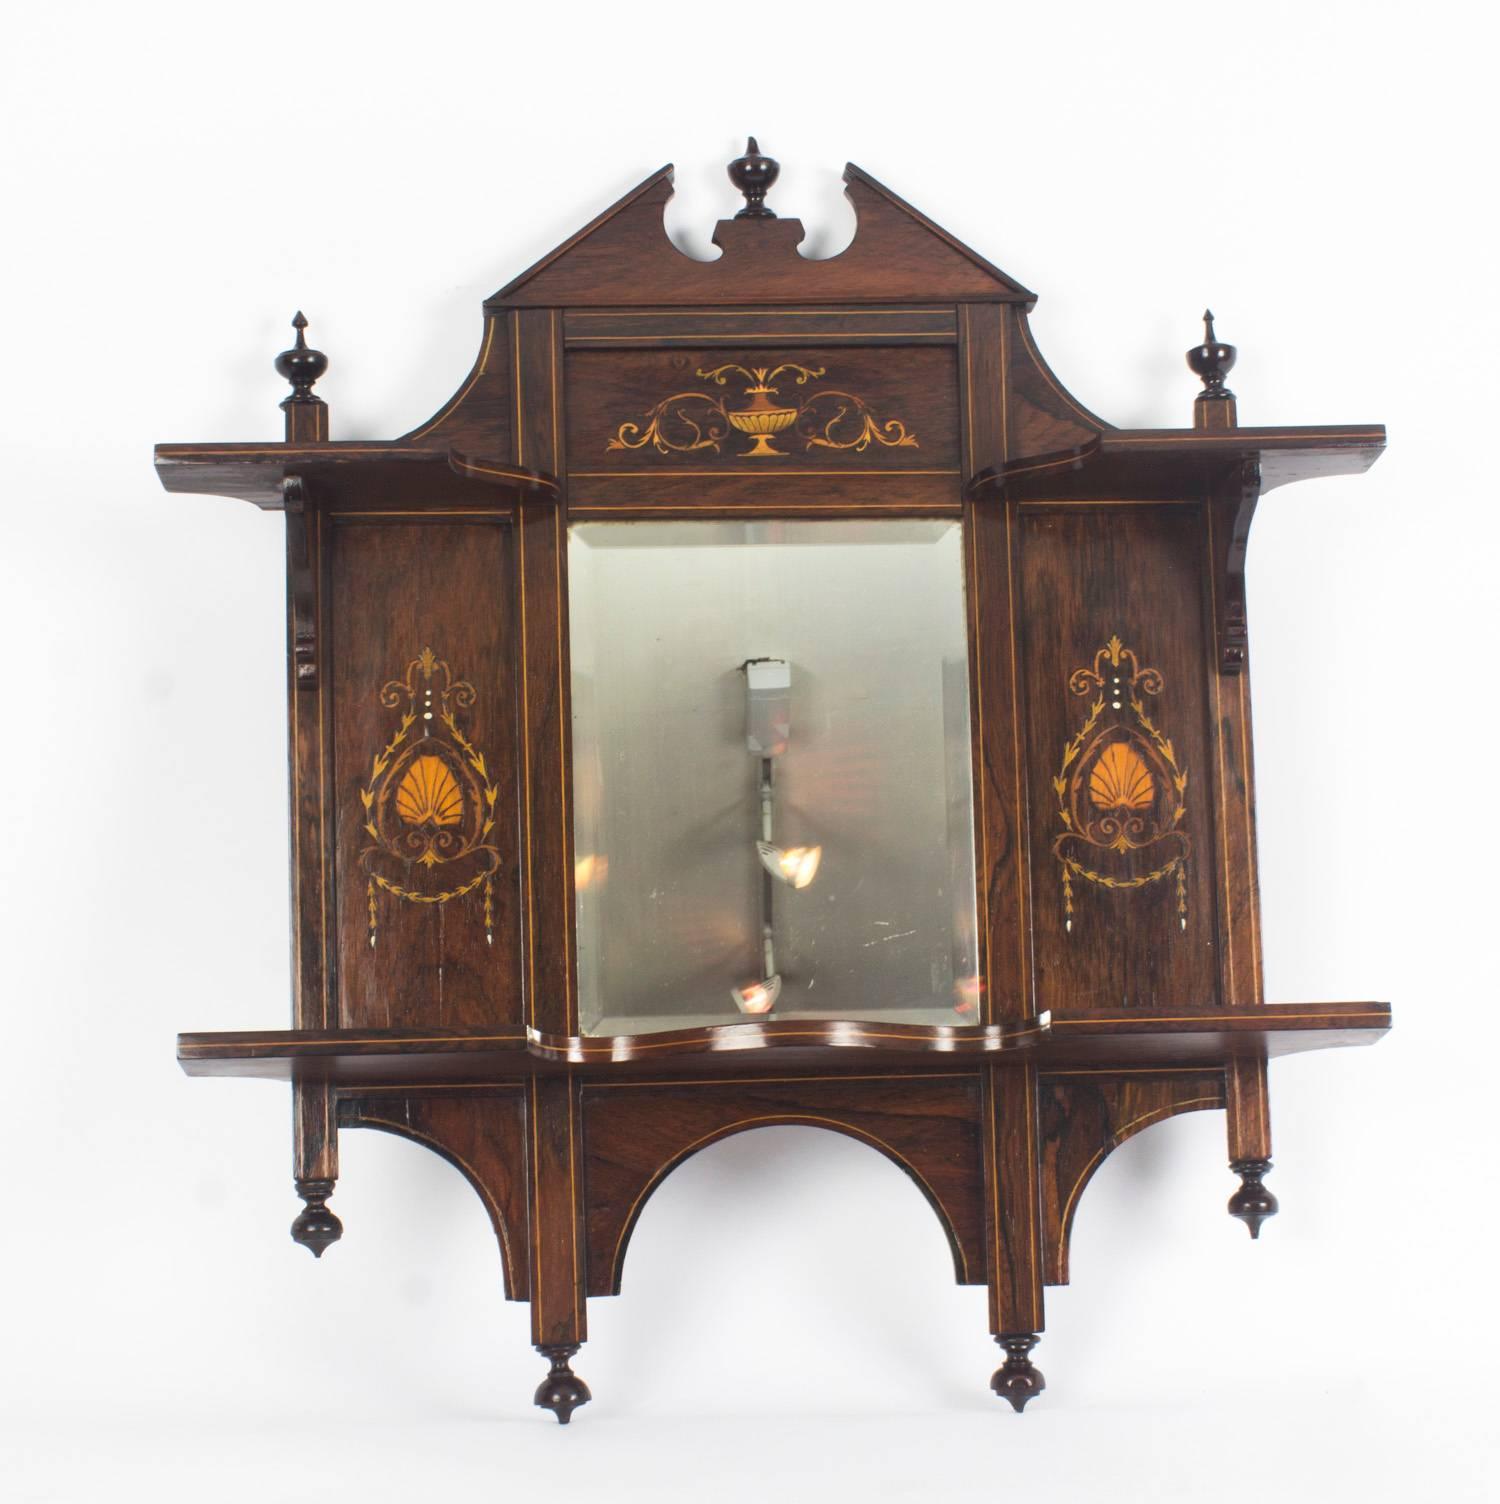 This is a beautiful antique Edwardian Goncalo Alves inlaid wall shelf with a mirrored back, circa 1900 in date.

The mirror has a beautiful frame with a broken pediment cornice to the top and fabulous marquetry decoration in the manner of Edwards